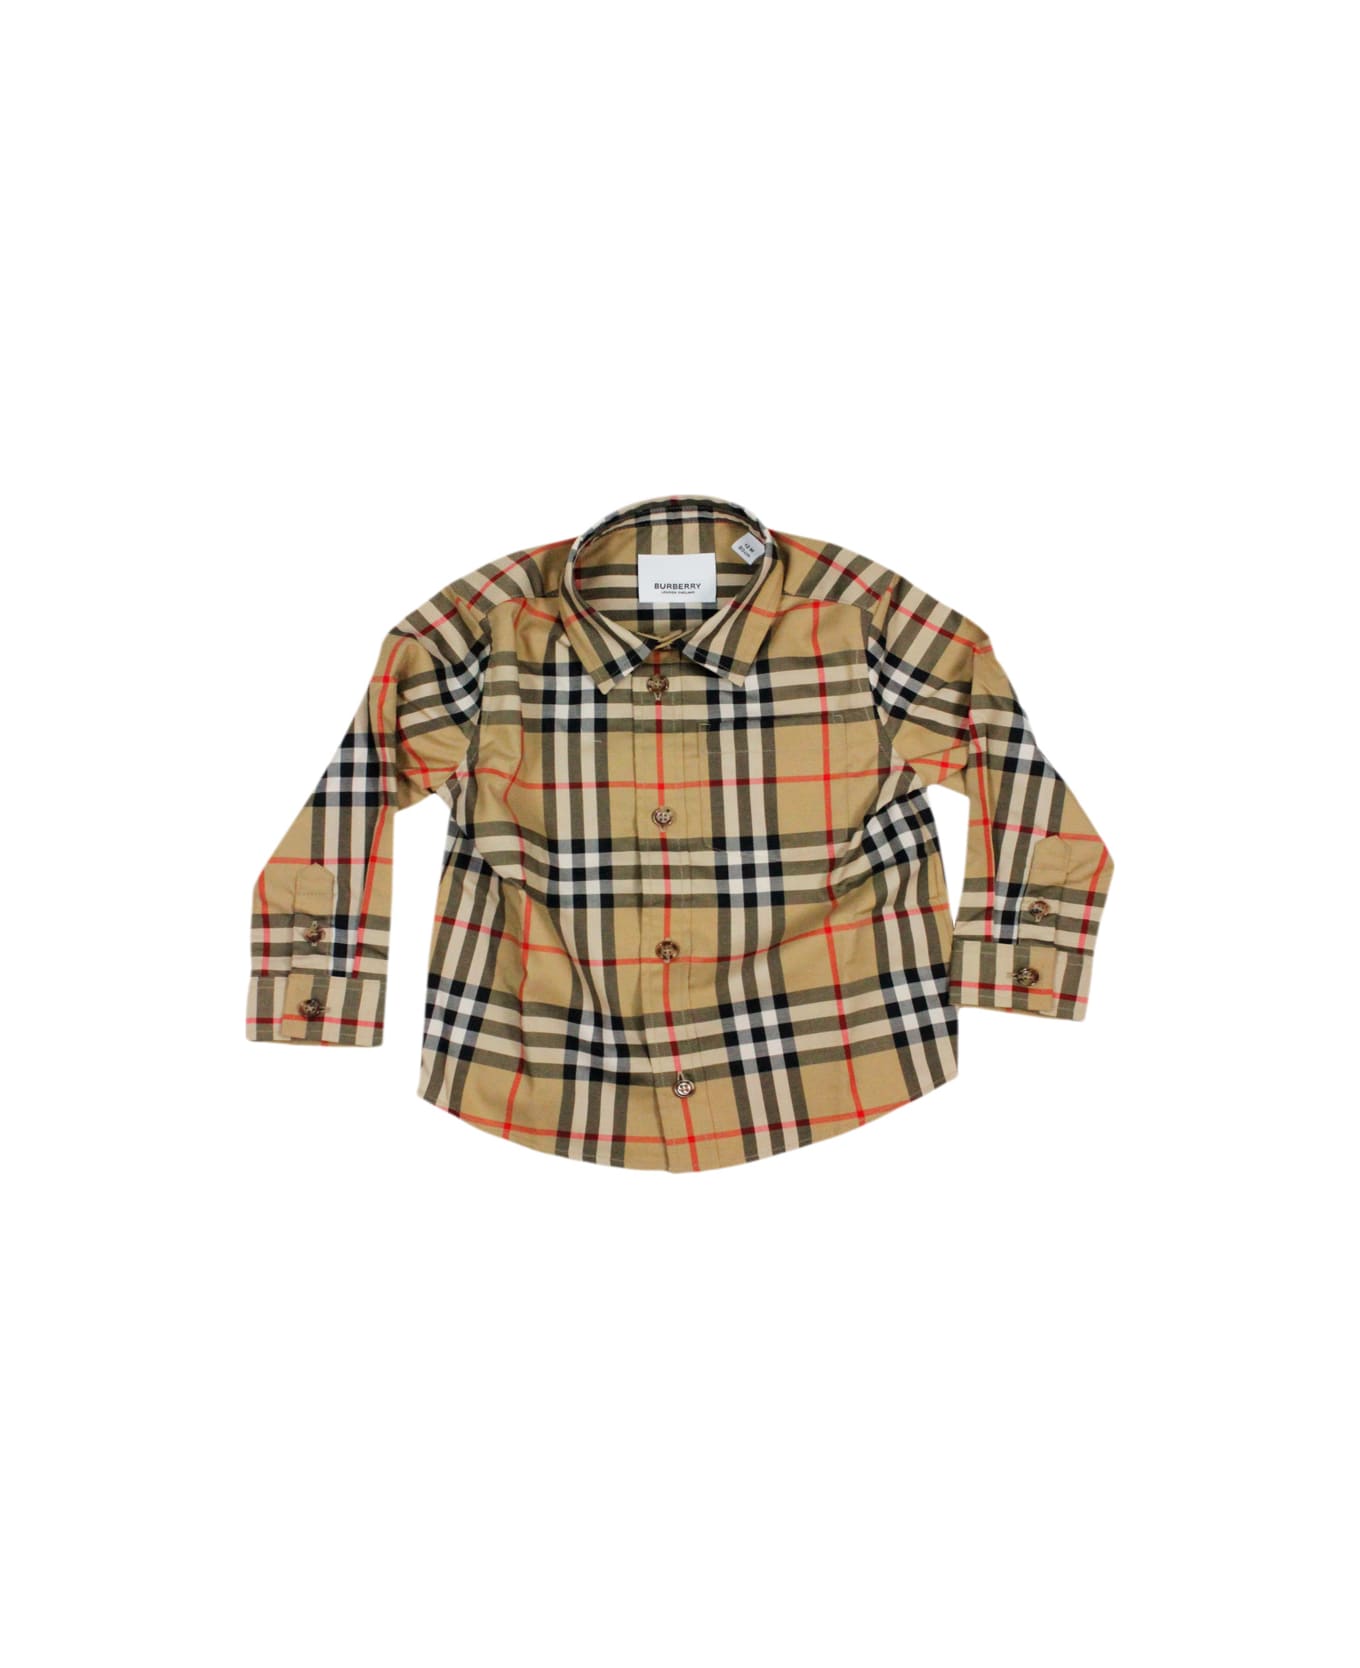 Burberry Stretch Cotton Twill Shirt With Patch Pocket On The Chest In A Vintage Check Pattern - Beige